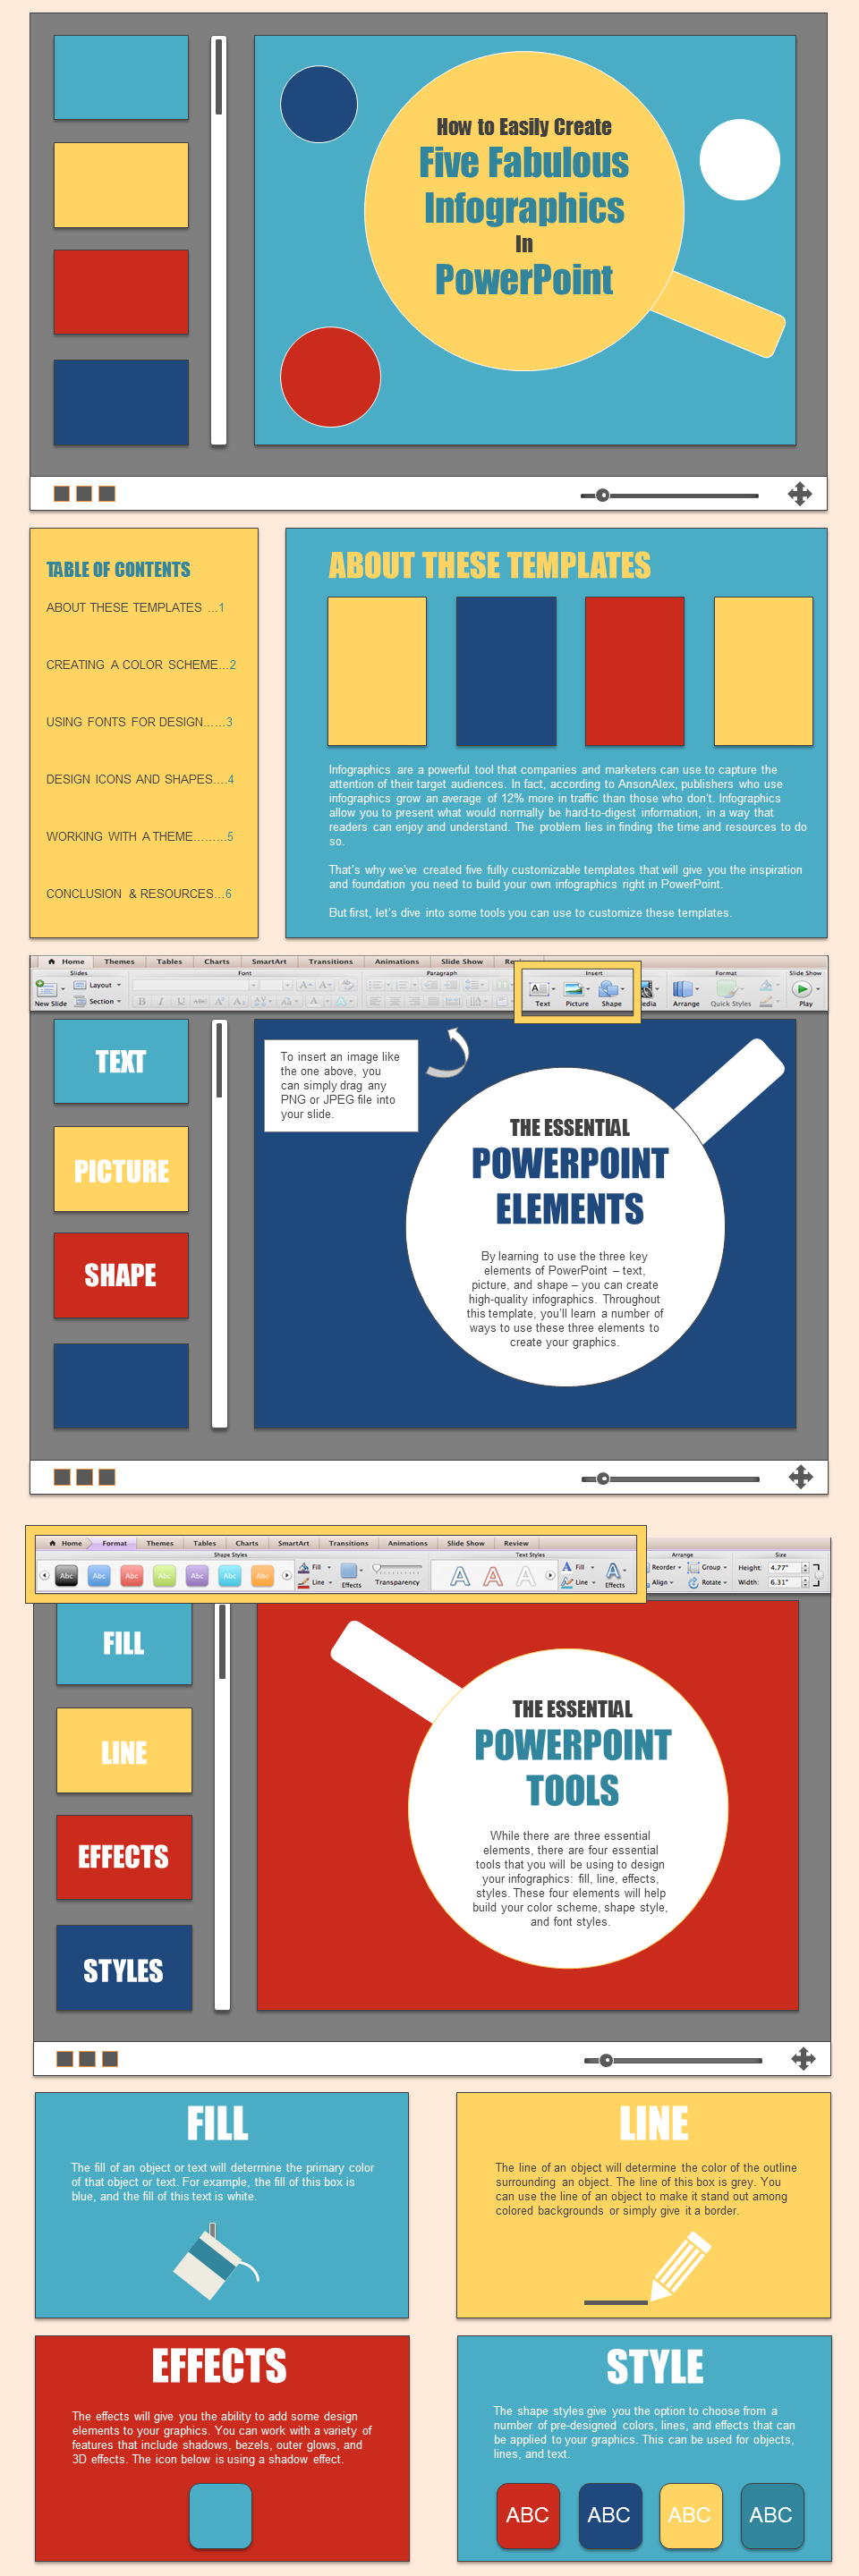 HubSpot-PowerPoint-Infograph-about-about-tragreting-Infographics